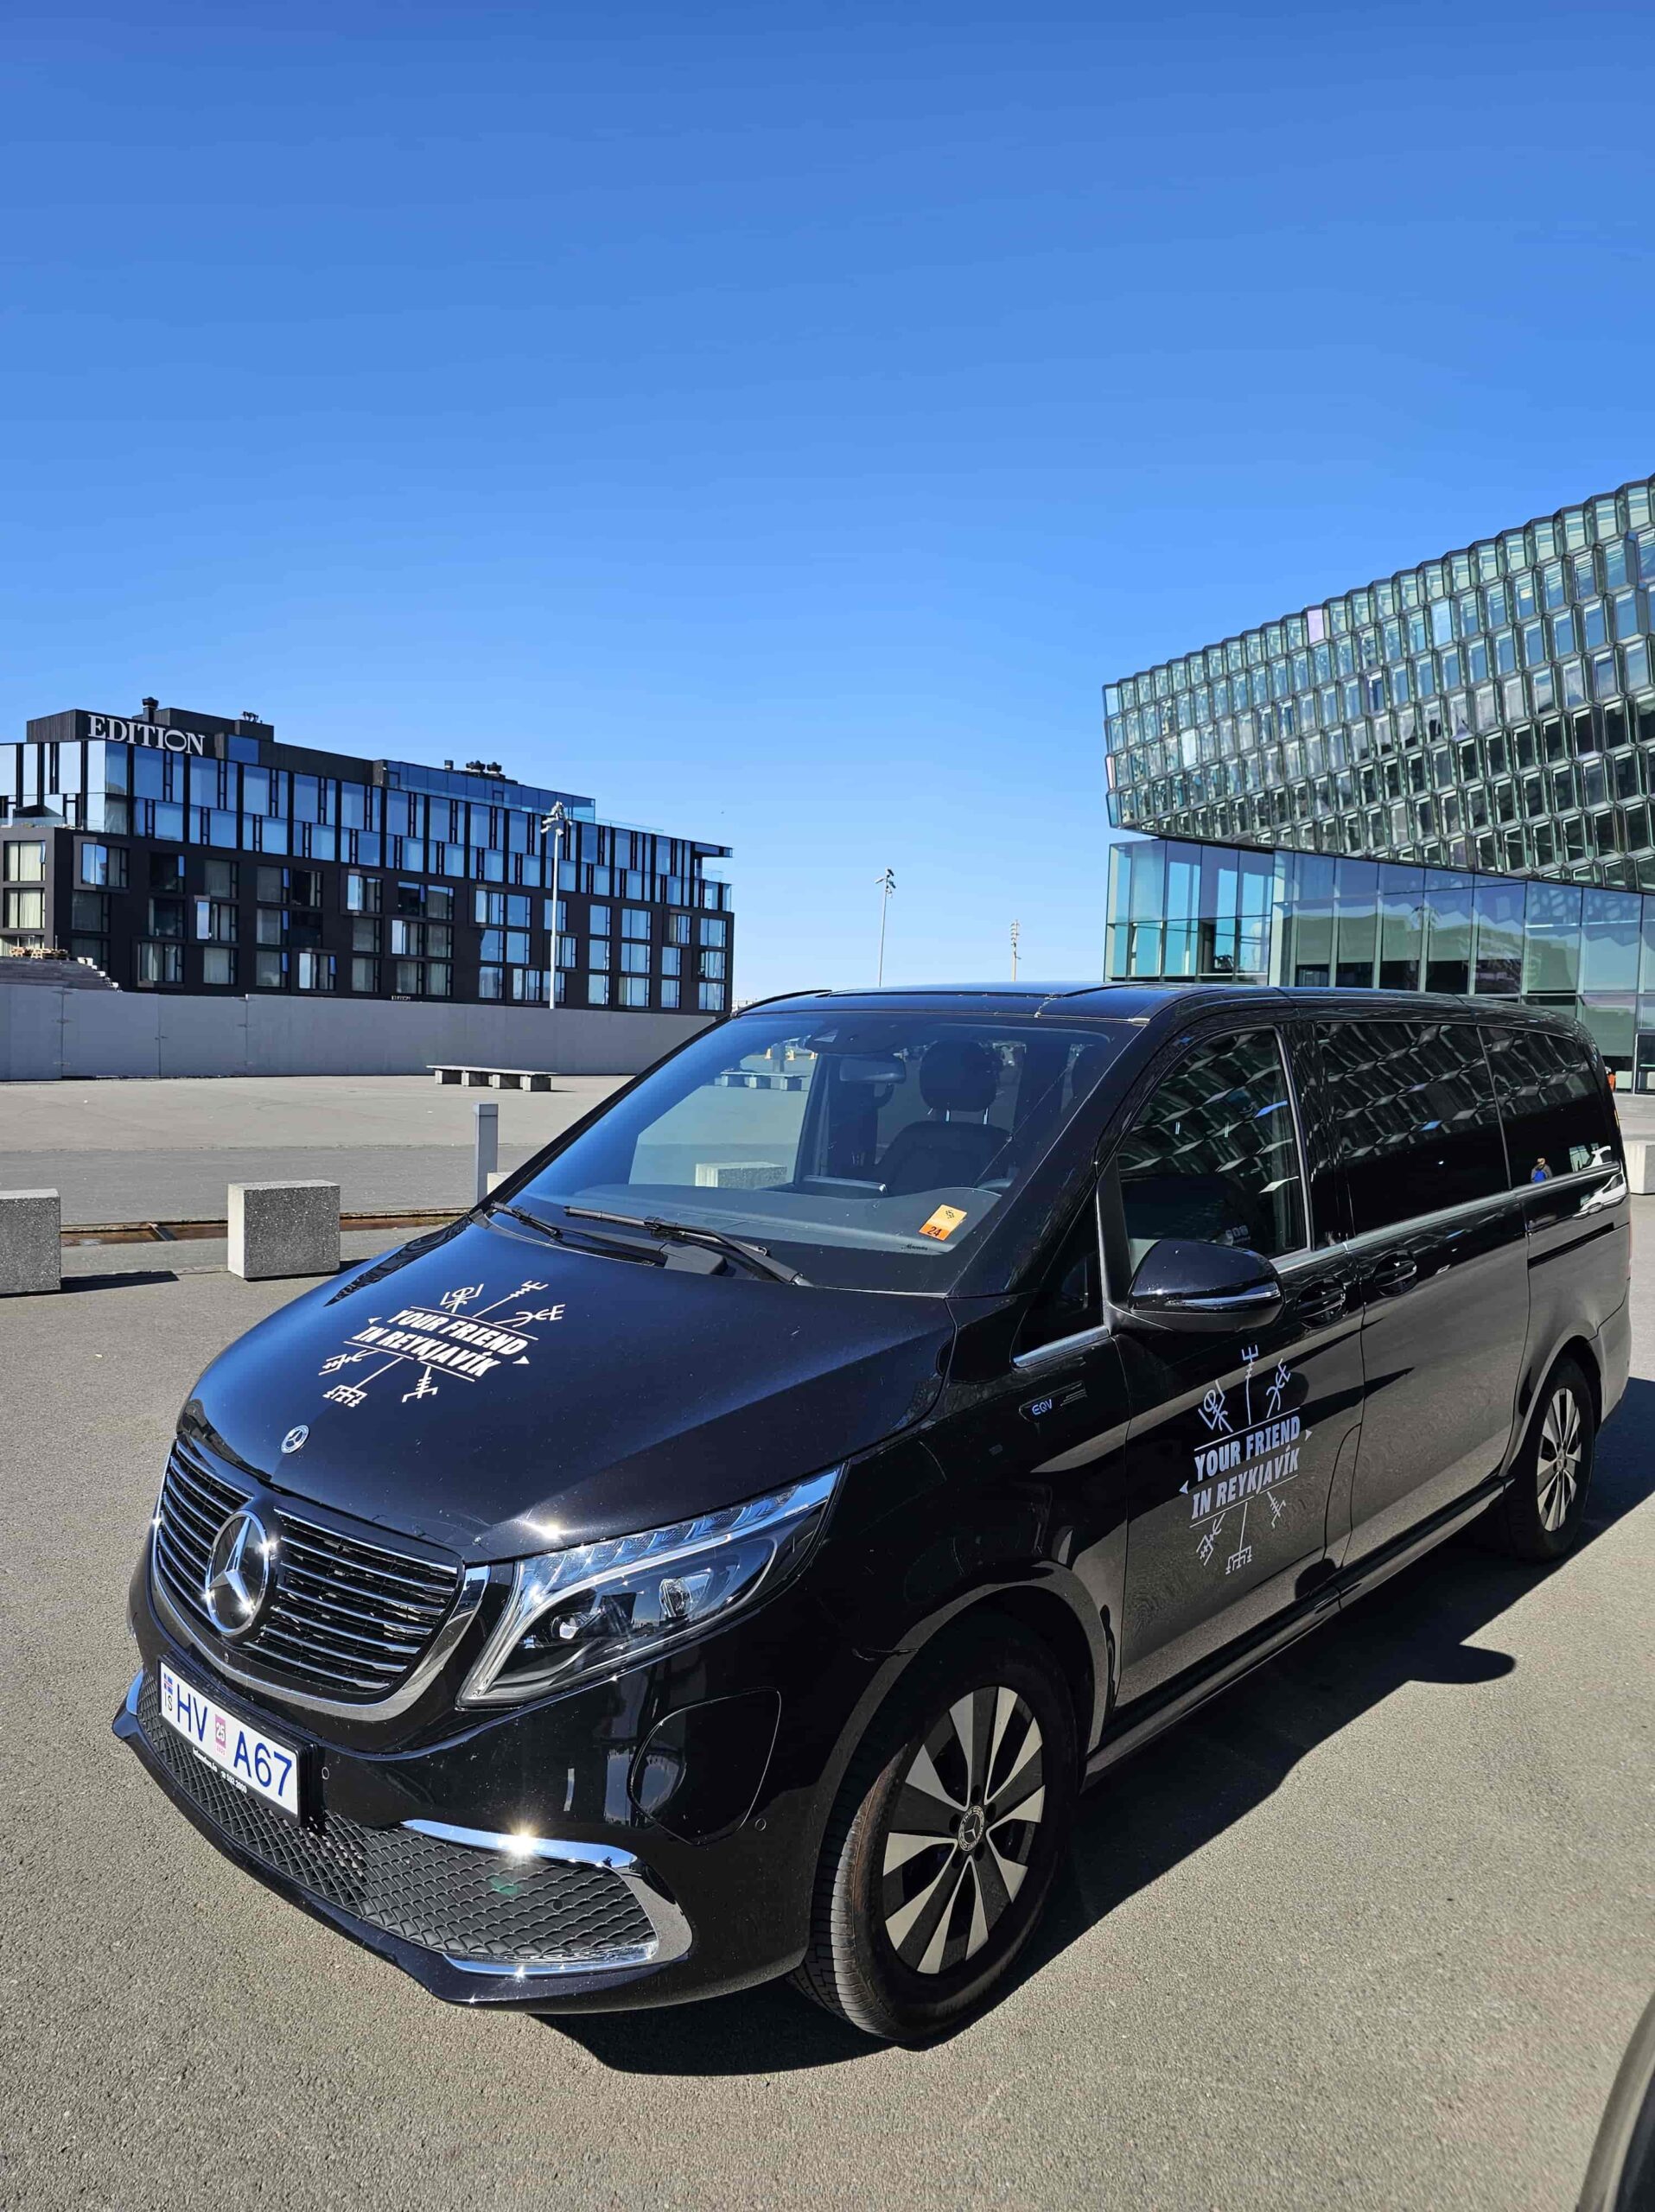 A luxurious tour vehicle from Your Friend in Reykjavik parked in front of the Harpa Concert Hall